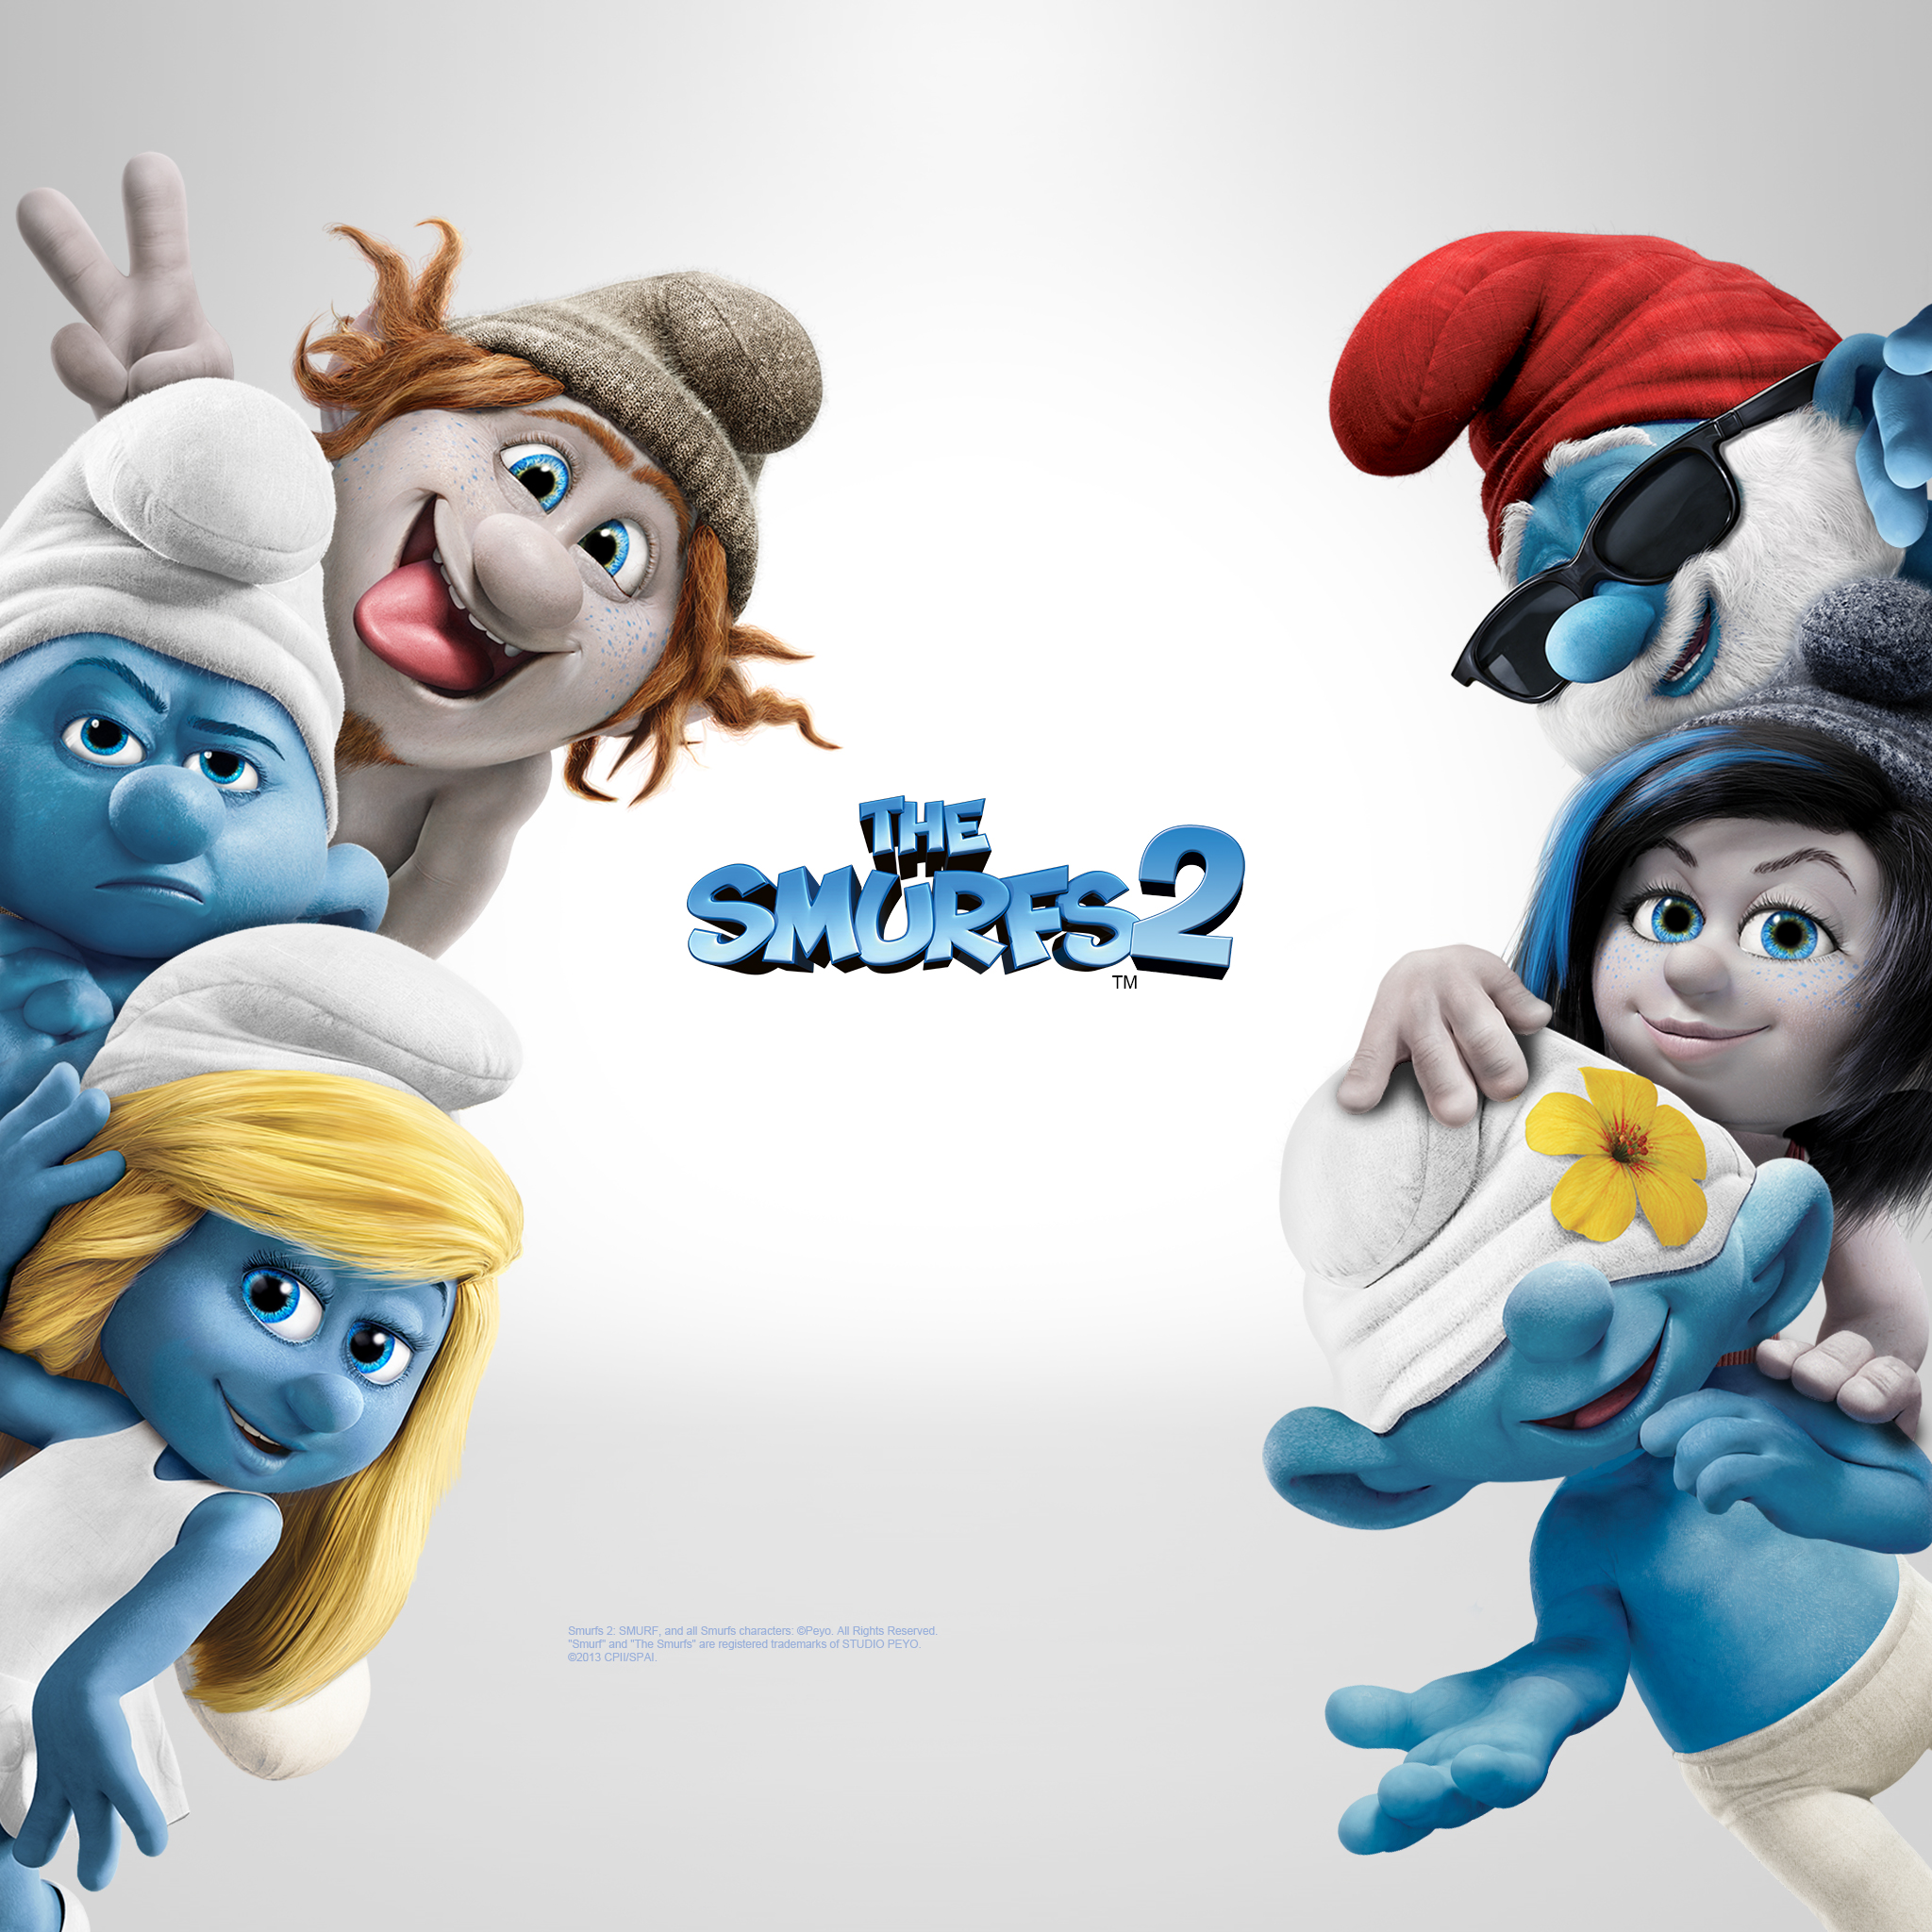 Papa In The Smurfs Wallpaper Gallery